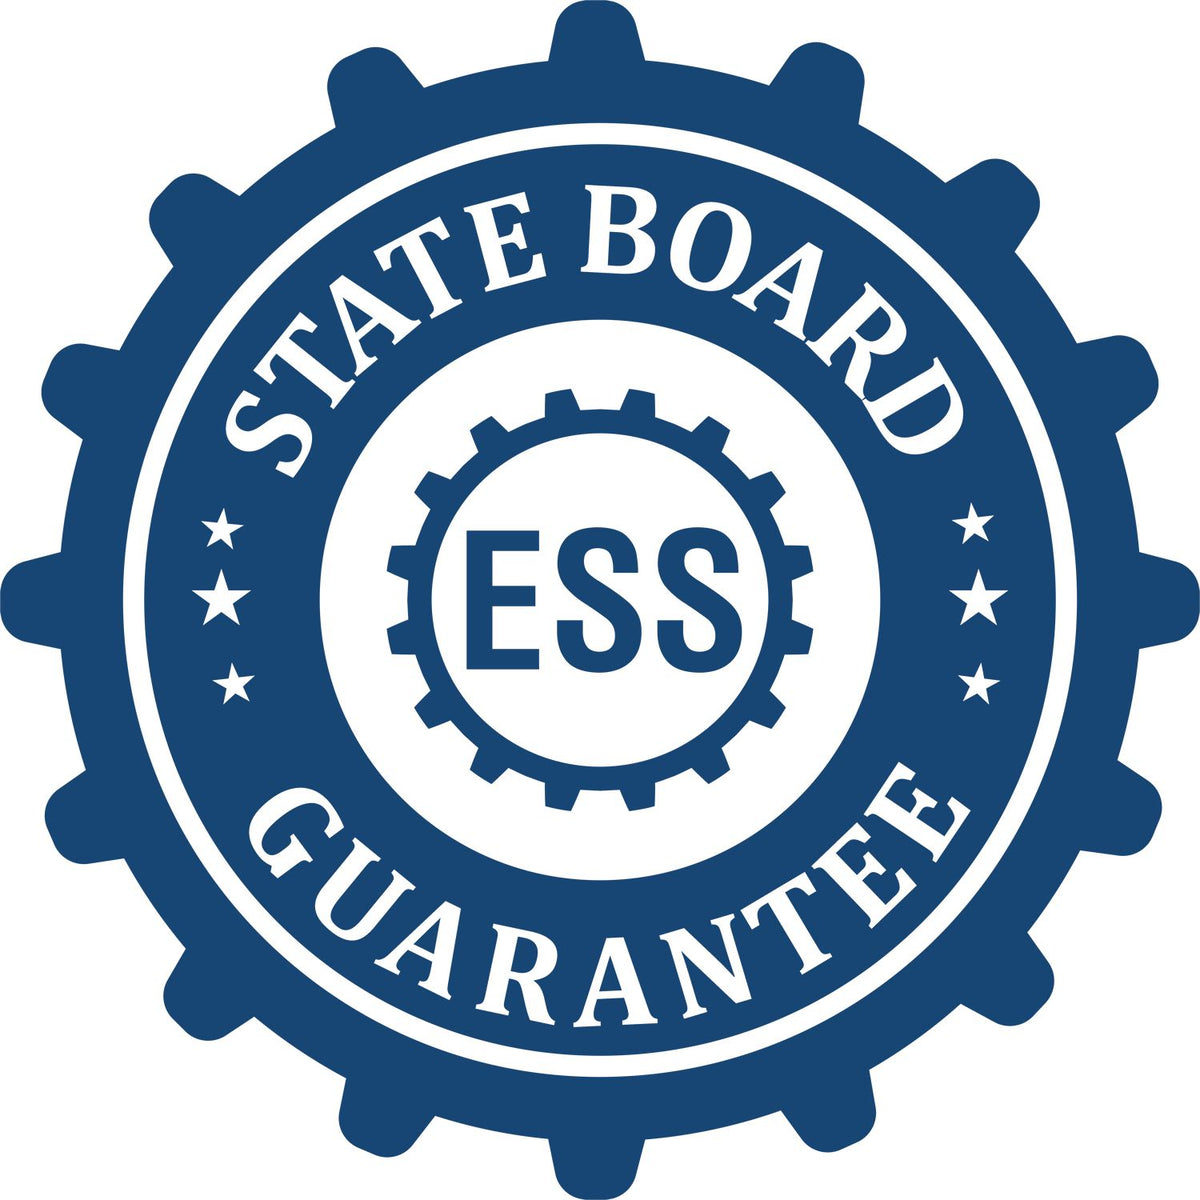 An emblem in a gear shape illustrating a state board guarantee for the Digital Tennessee Geologist Stamp, Electronic Seal for Tennessee Geologist